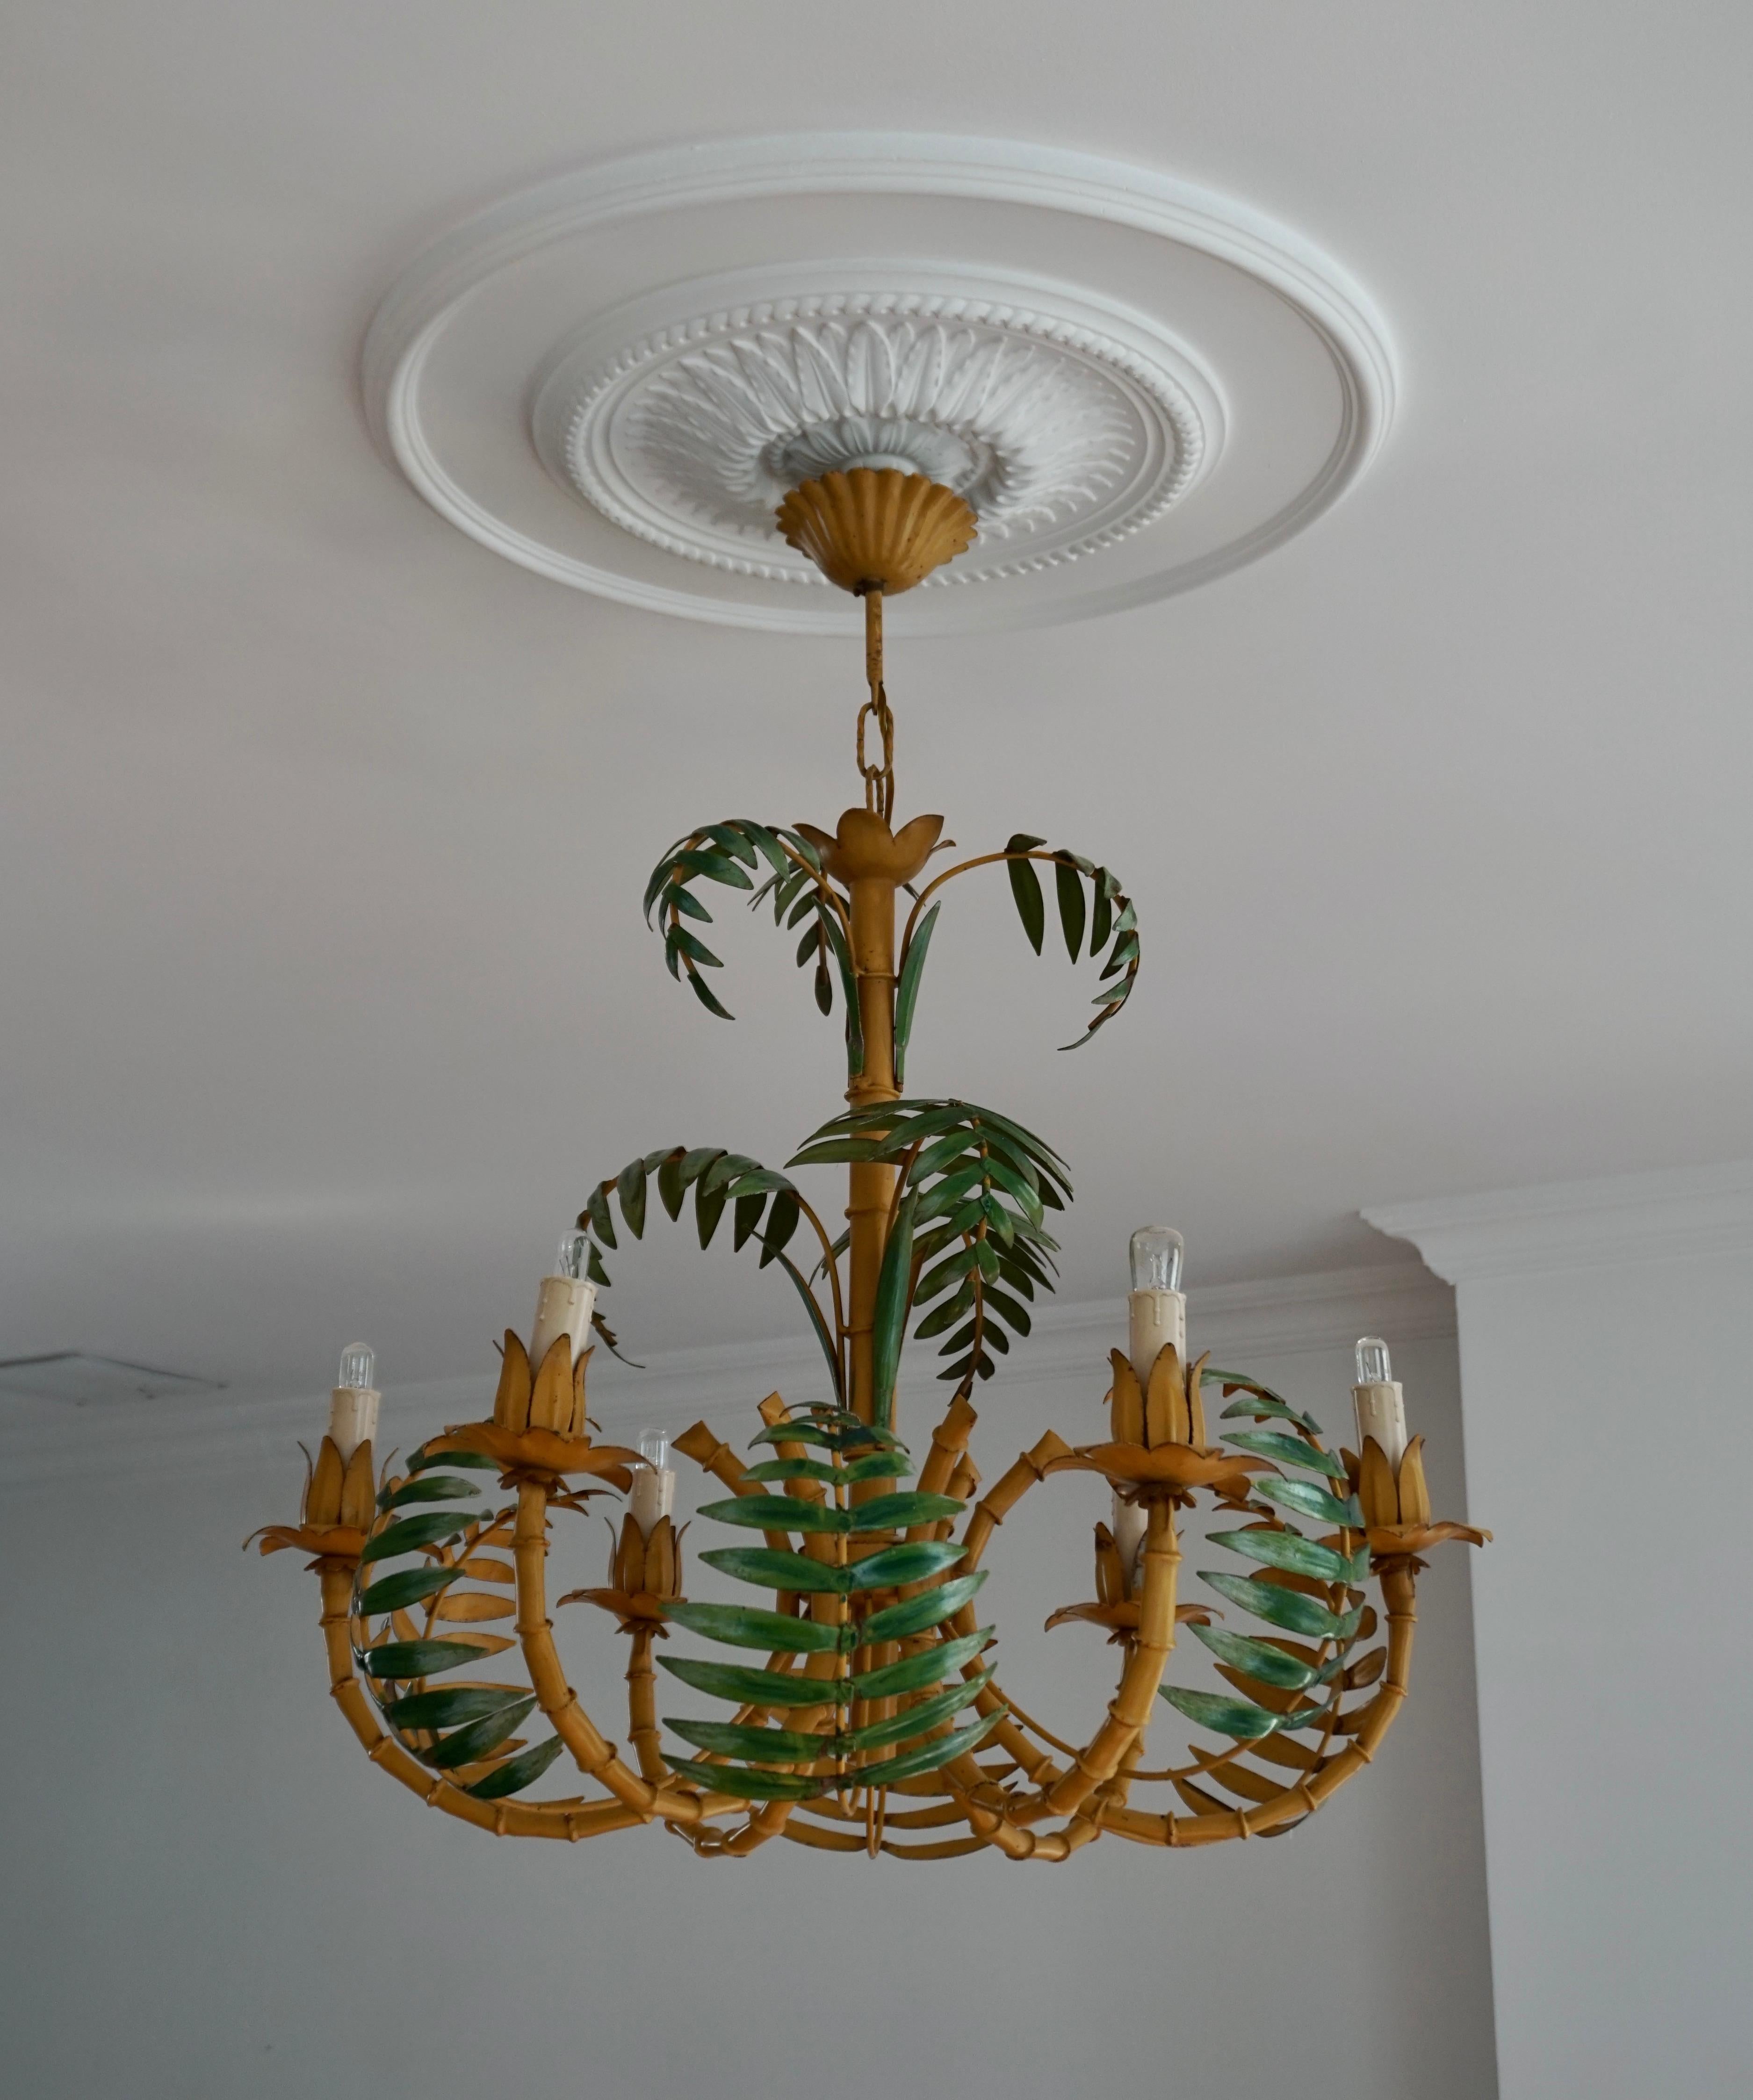 Super chic pale yellow faux bamboo Hollywood Regency chandelier with green leaves, perfect for a hallway or foyer, having 6 arms and wonderful construction of tole, iron and faux bamboo. We love the color. Original canopy and wiring.

Measures: